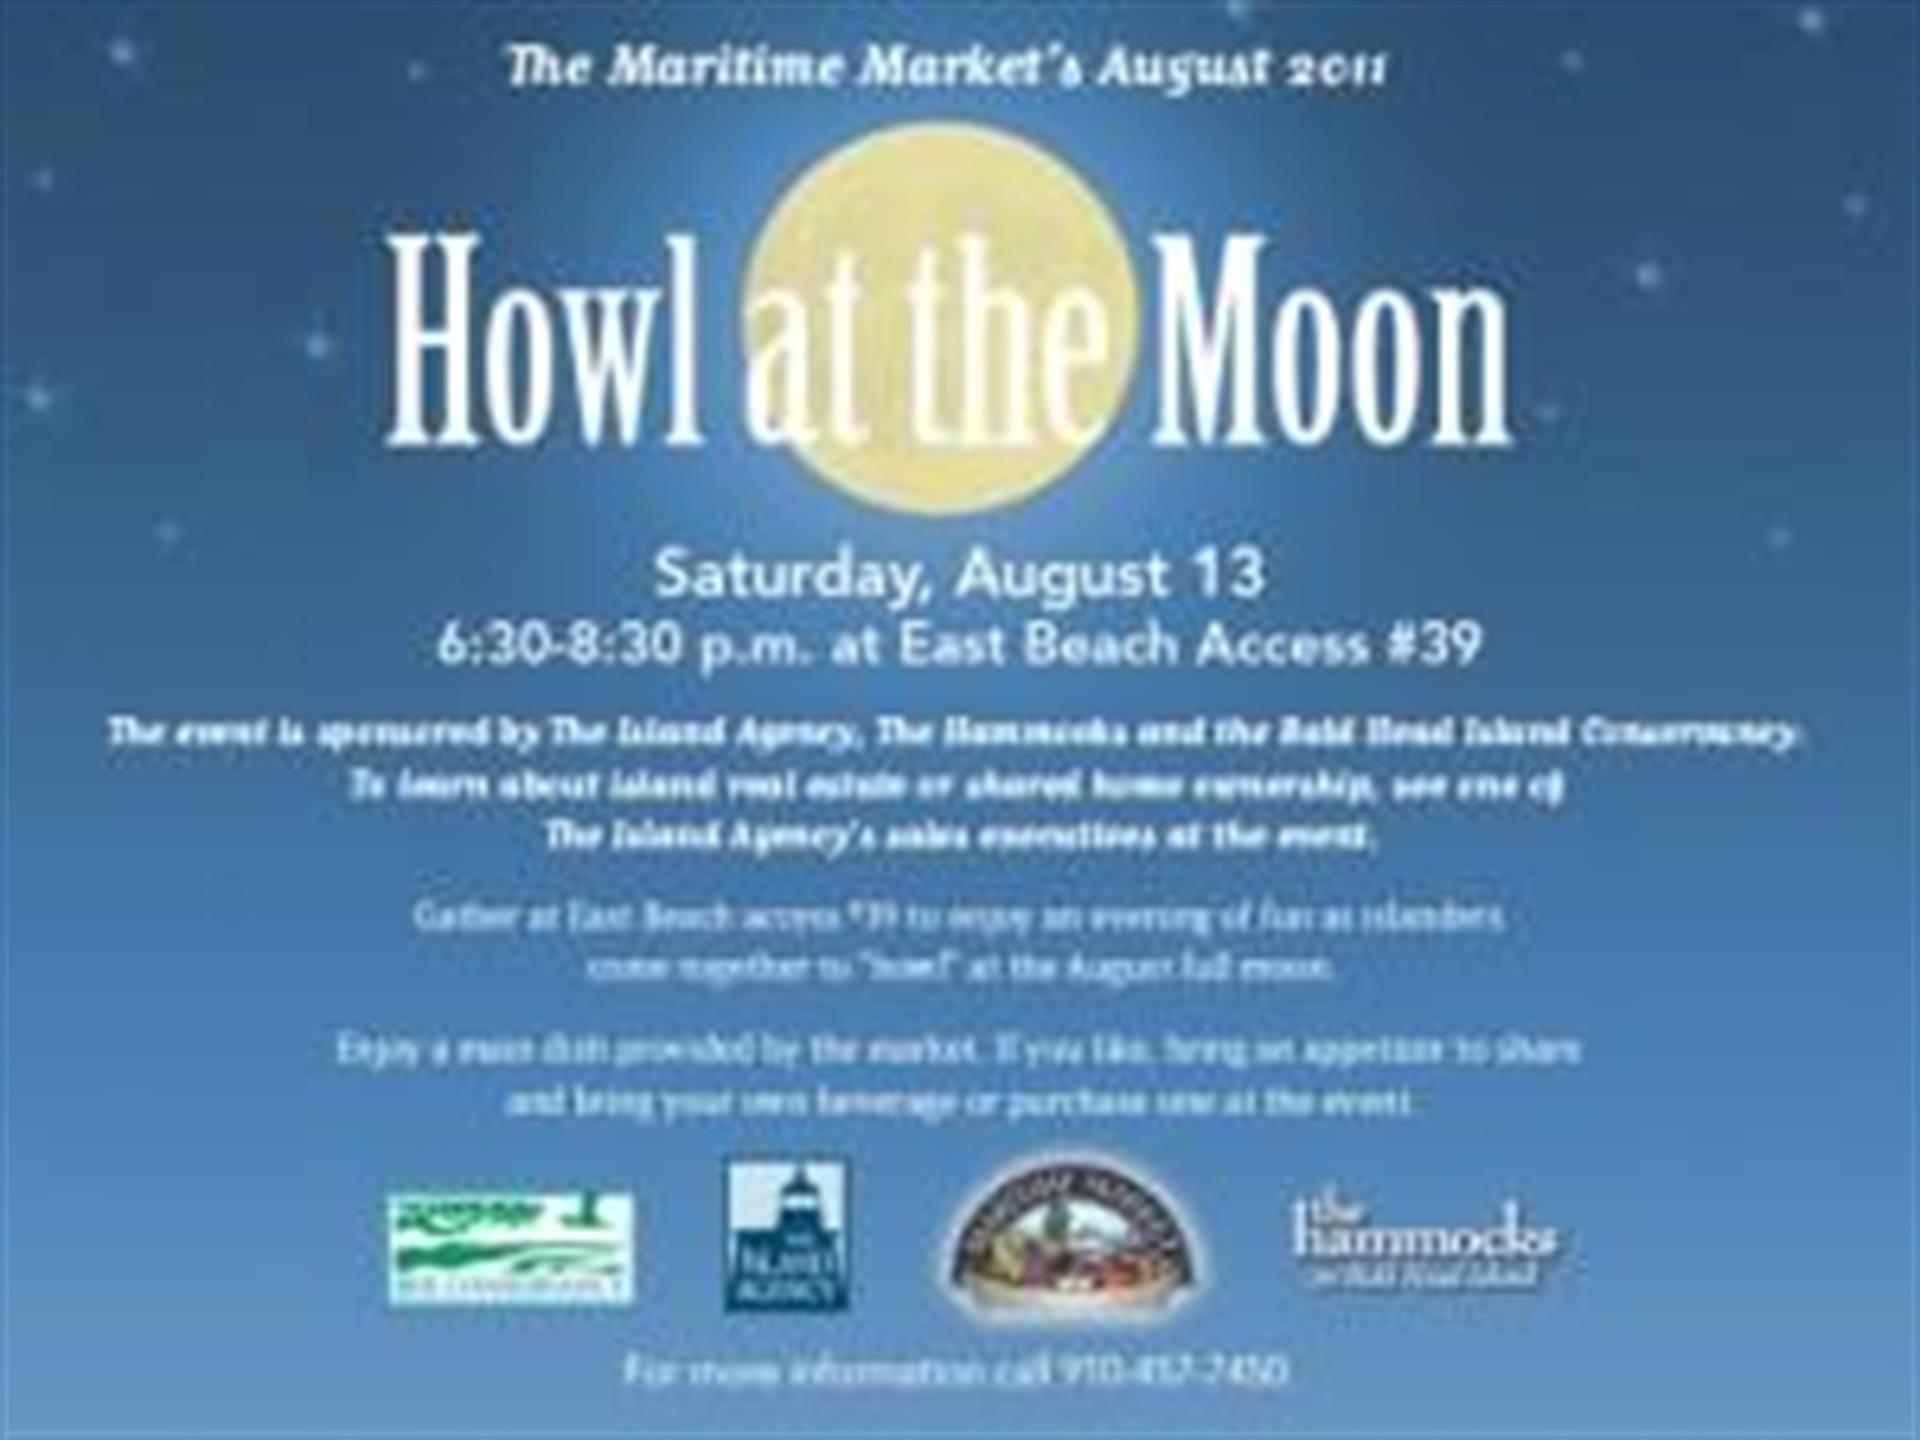 The Island Agency Sponsors Howl at the Moon